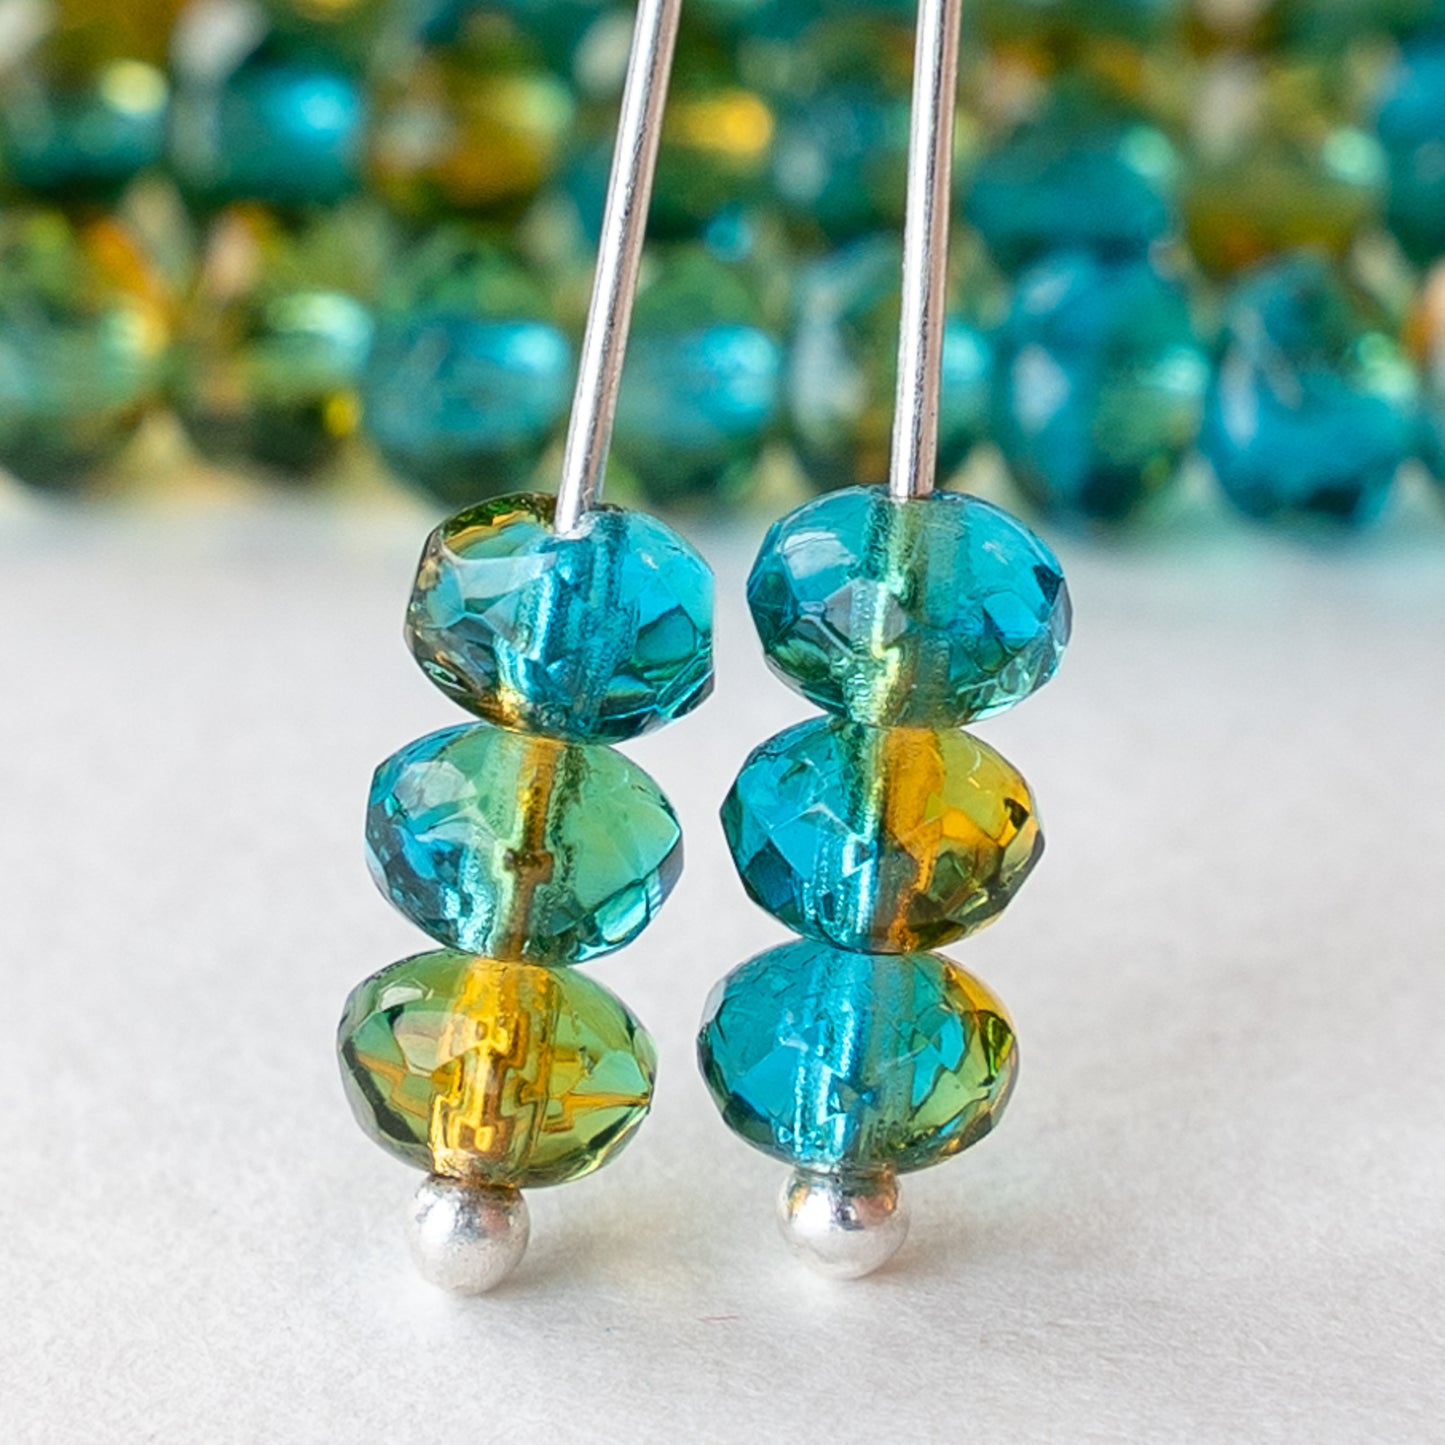 3x5mm Firepolished Glass Rondelles - Amber and Teal - 50 Beads